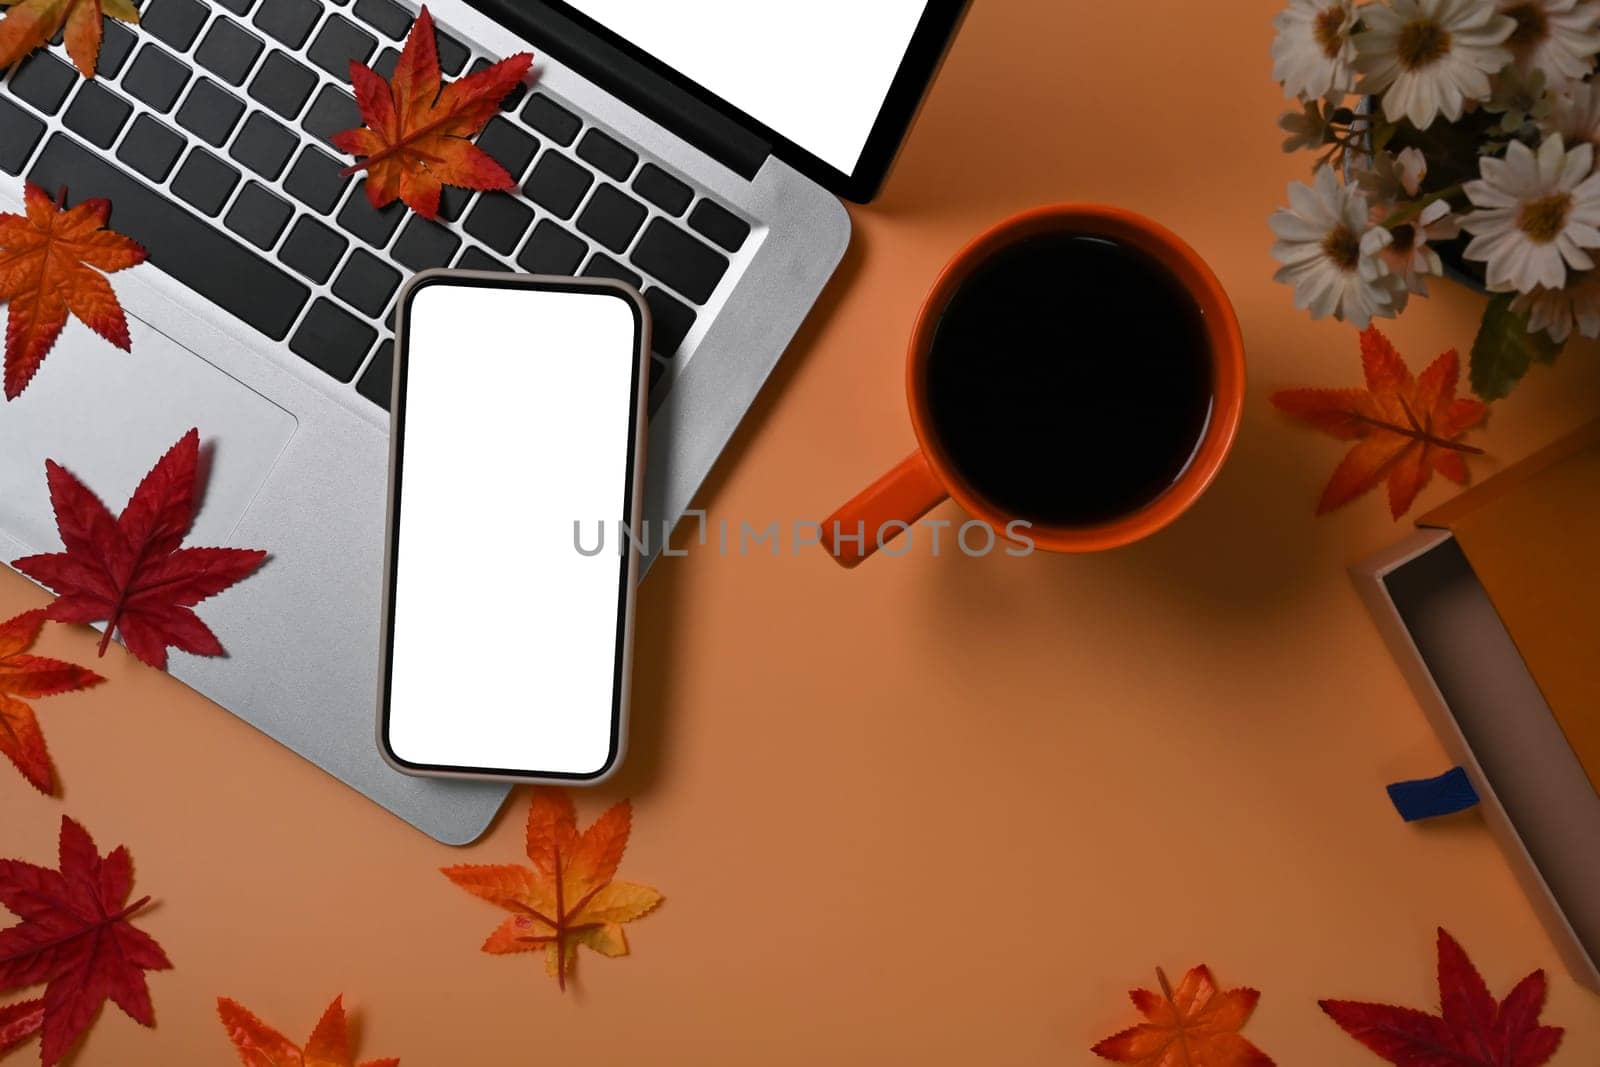 Mobile phone, laptop computer, coffee cup and maple leaf on brown background.